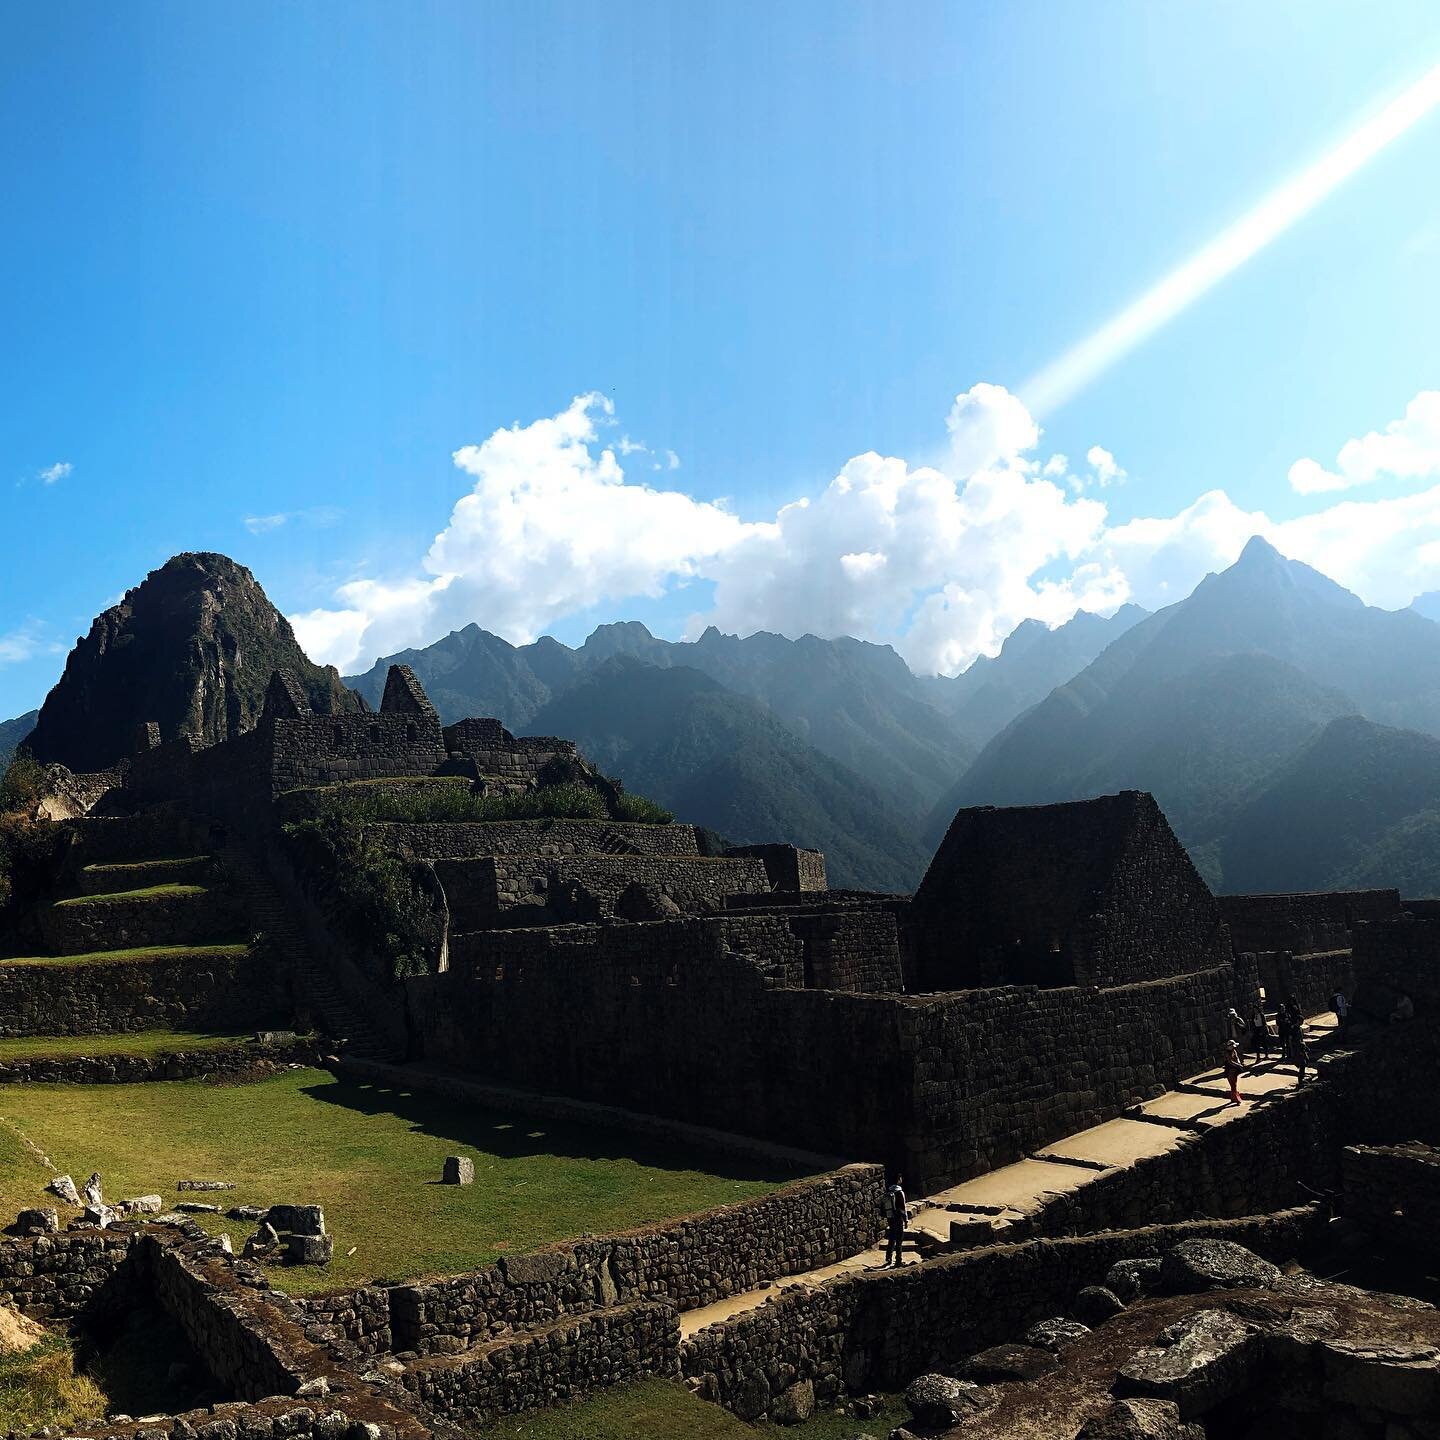 Visiting Machu Picchu was an experience we will never forget
.
.
.
⛰️Still seems like it was yesterday
.
🥾Everywhere we turned, there was something to marvel at - the mind-blowing architecture, the incredible green rolling hills dotted with ancient 